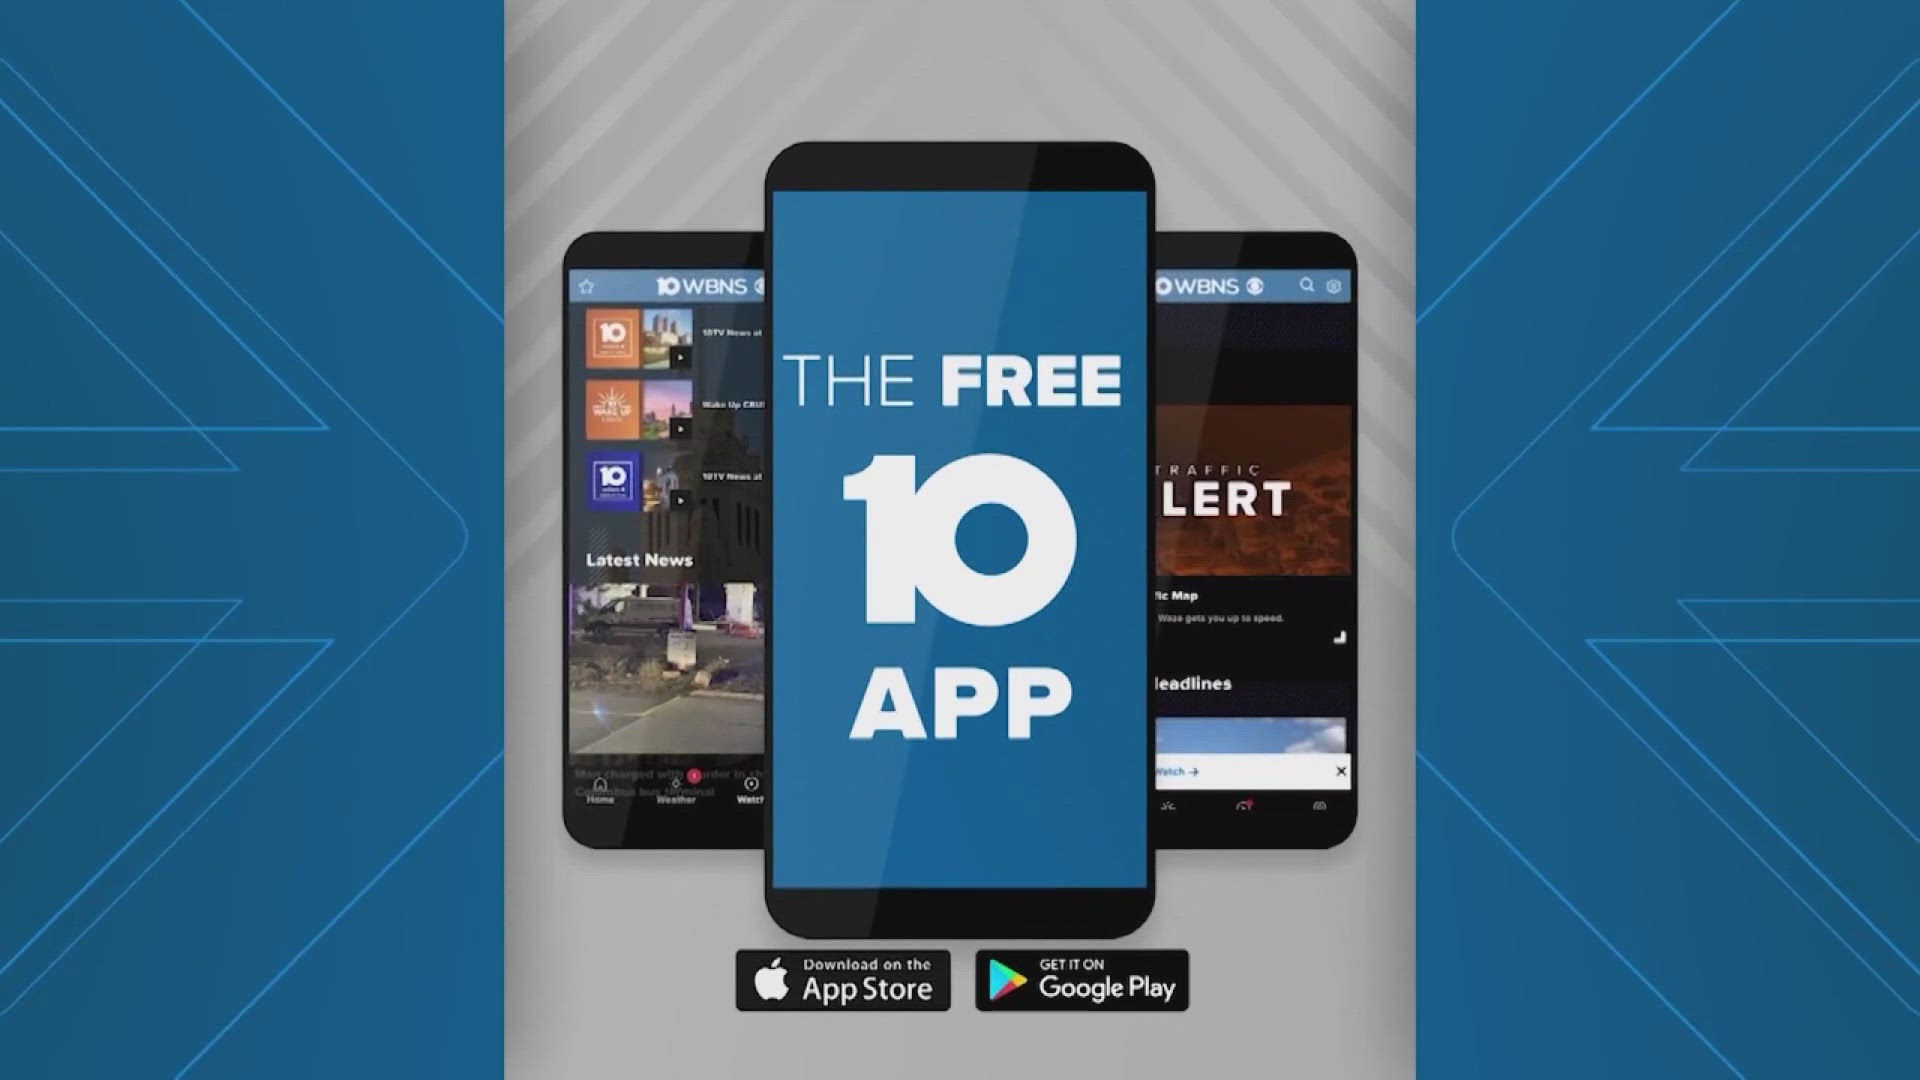 Stay up-to-date with the latest news, weather and traffic in the Columbus, Ohio area on the free 10TV app.